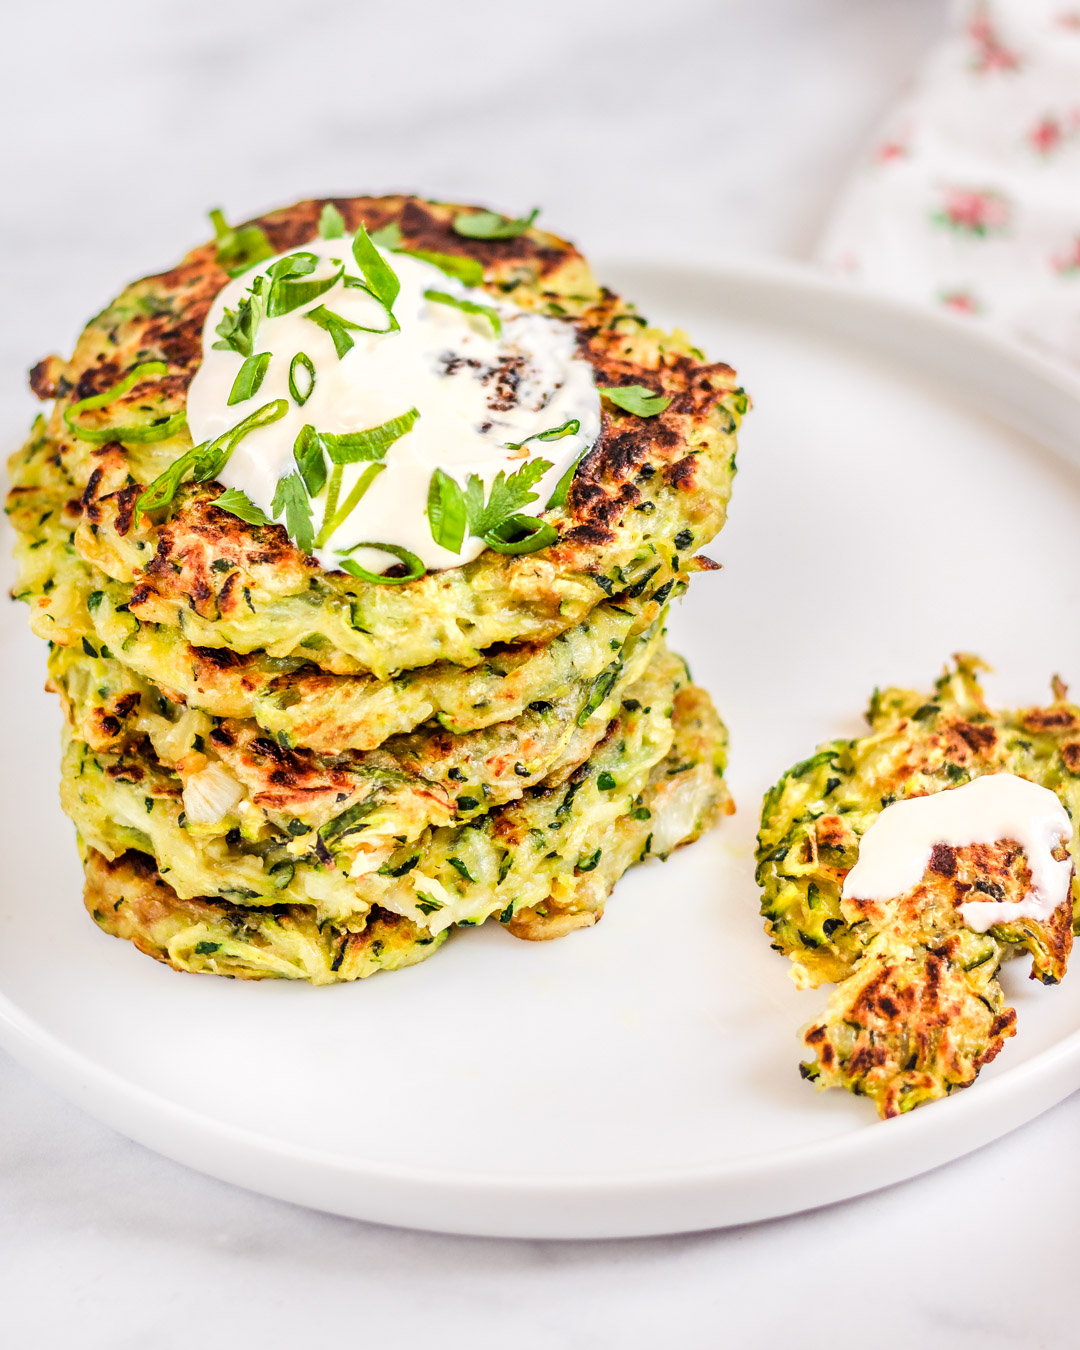 Vegan zucchini and chickpea fritters